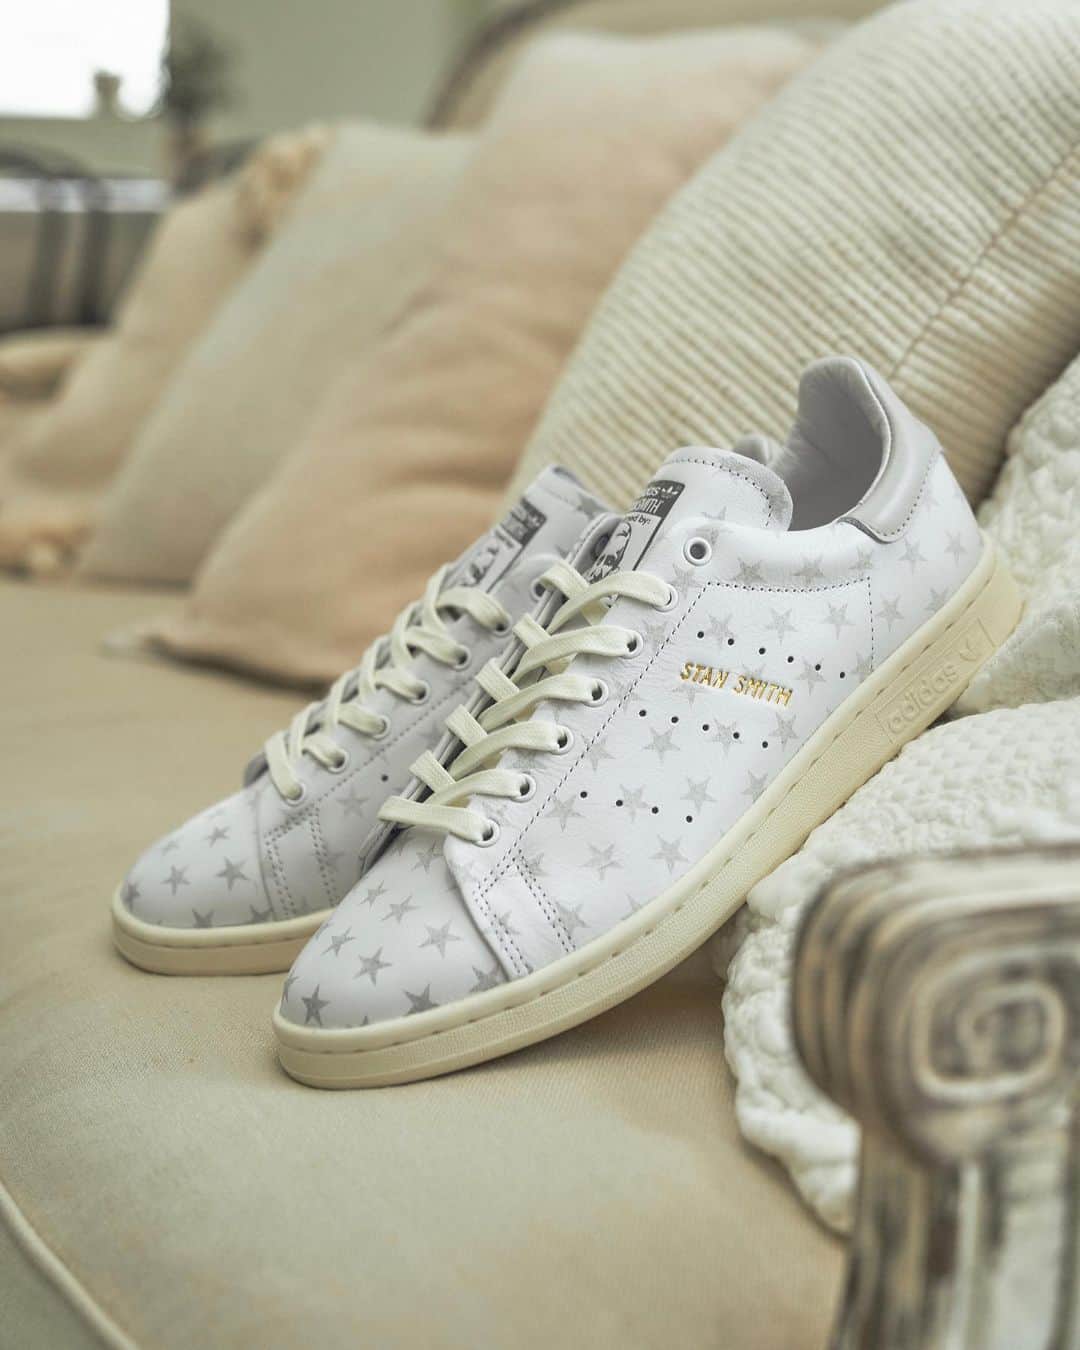 アトモスさんのインスタグラム写真 - (アトモスInstagram)「.  「adidas Originals × atmos GOLD STAR PACK」第3弾となる STAN SMITH LUX atmos が登場。  adidasを履いた数々の偉大なスターやプレーヤーからインスパイアを受けた“GOLD STAR PACK”。 今作は、adidas Originalsの代表作でもあるSTAN SMITHからPREMIUMラインのLUXシリーズを採用。 前作同様、無垢なホワイトのアッパーをベースにシルバーのスターを配置、サイドにはデボス加工に金の箔押しでSTAN SMITHと入りラグジュアリーな雰囲気を表現します。パンチングのスリーストライプスとアイコニックでクリーンなシルエットはそのままにしっとりとソフトなライニングで、精緻なクラフツマンシップとプレミアムなディテールが光る一足です。  本商品は2023年4⽉18⽇(火)よりatmosオンライン、atmos/atmos pink ZOZOTOWNにて先行発売。4⽉25⽇(火)よりA.T.A.D、atmos 各店（一部店舗除く）にて発売致します。  The third edition of the "adidas Originals x atmos GOLD STAR PACK" STAN SMITH LUX atmos is now available.  The "GOLD STAR PACK" is inspired by the many great stars and players who have worn adidas shoes. This time, the LUX series from the PREMIUM line of STAN SMITH, one of adidas Originals' flagship products, has been adopted. As in the previous work, a silver star is placed on a solid white upper base, and STAN SMITH is debossed and stamped in gold foil on the side, expressing a luxurious atmosphere. The perforated three stripes and iconic clean silhouette remain intact with a moist and soft lining, and the pair shines with exquisite craftsmanship and premium detailing.  This product will be available at atmos online and atmos/atmos pink ZOZOTOWN from April 18, 2023 and at A.T.A.D and atmos stores from April 25, 2023 (excluding some stores).  #atmos #adidas #stansmith #stansmithlux #goldstarpack」4月11日 17時00分 - atmos_japan